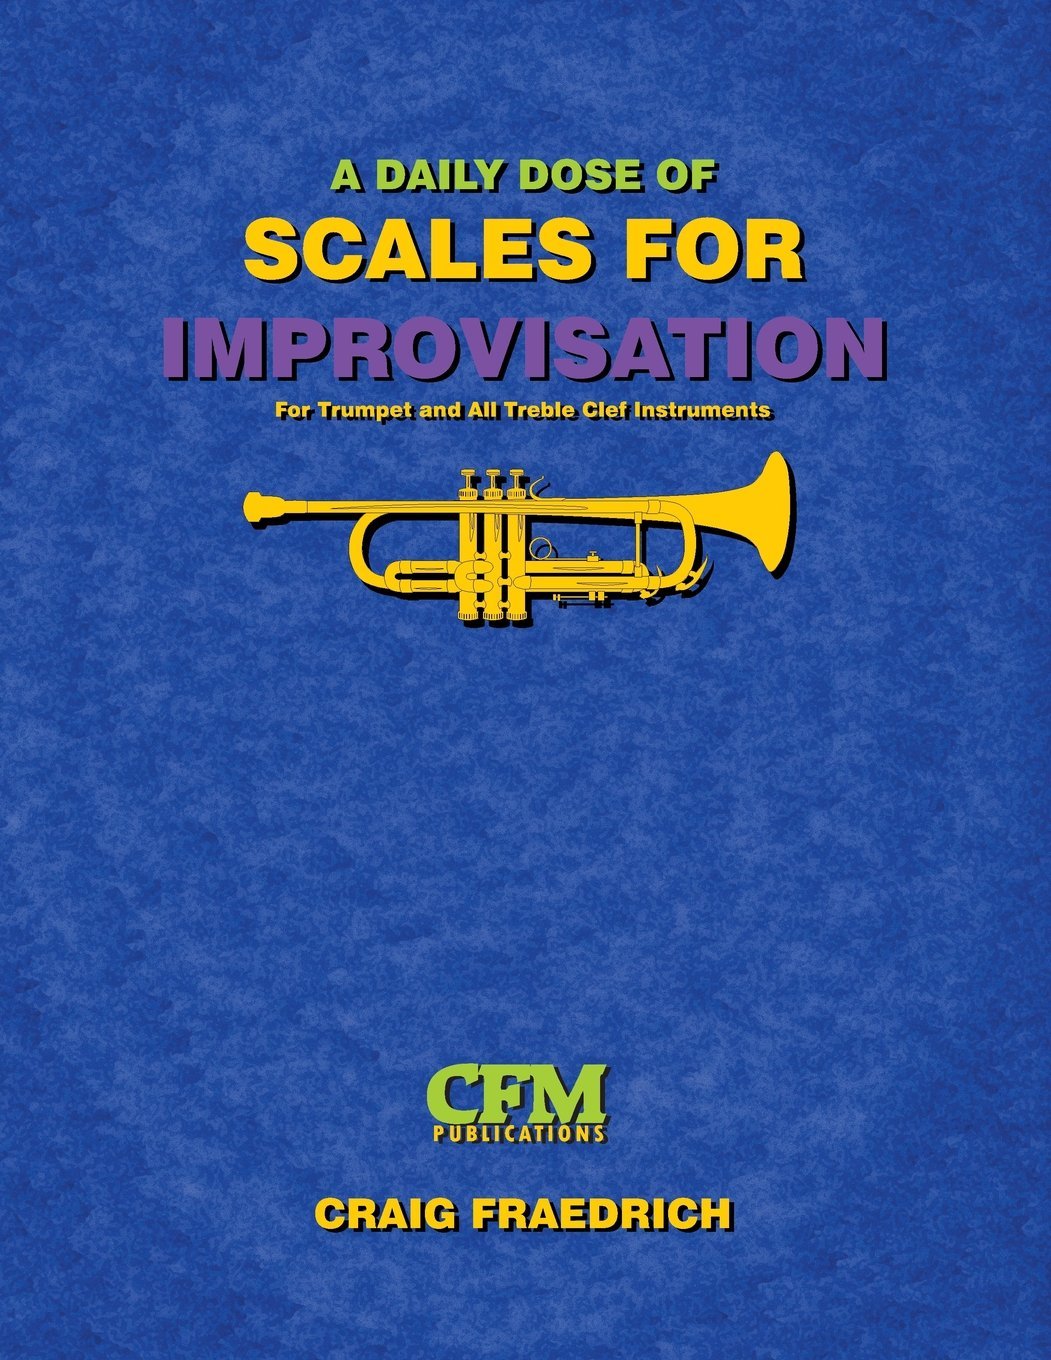 Daily Dose- Scales for Improvisation- Trumpet